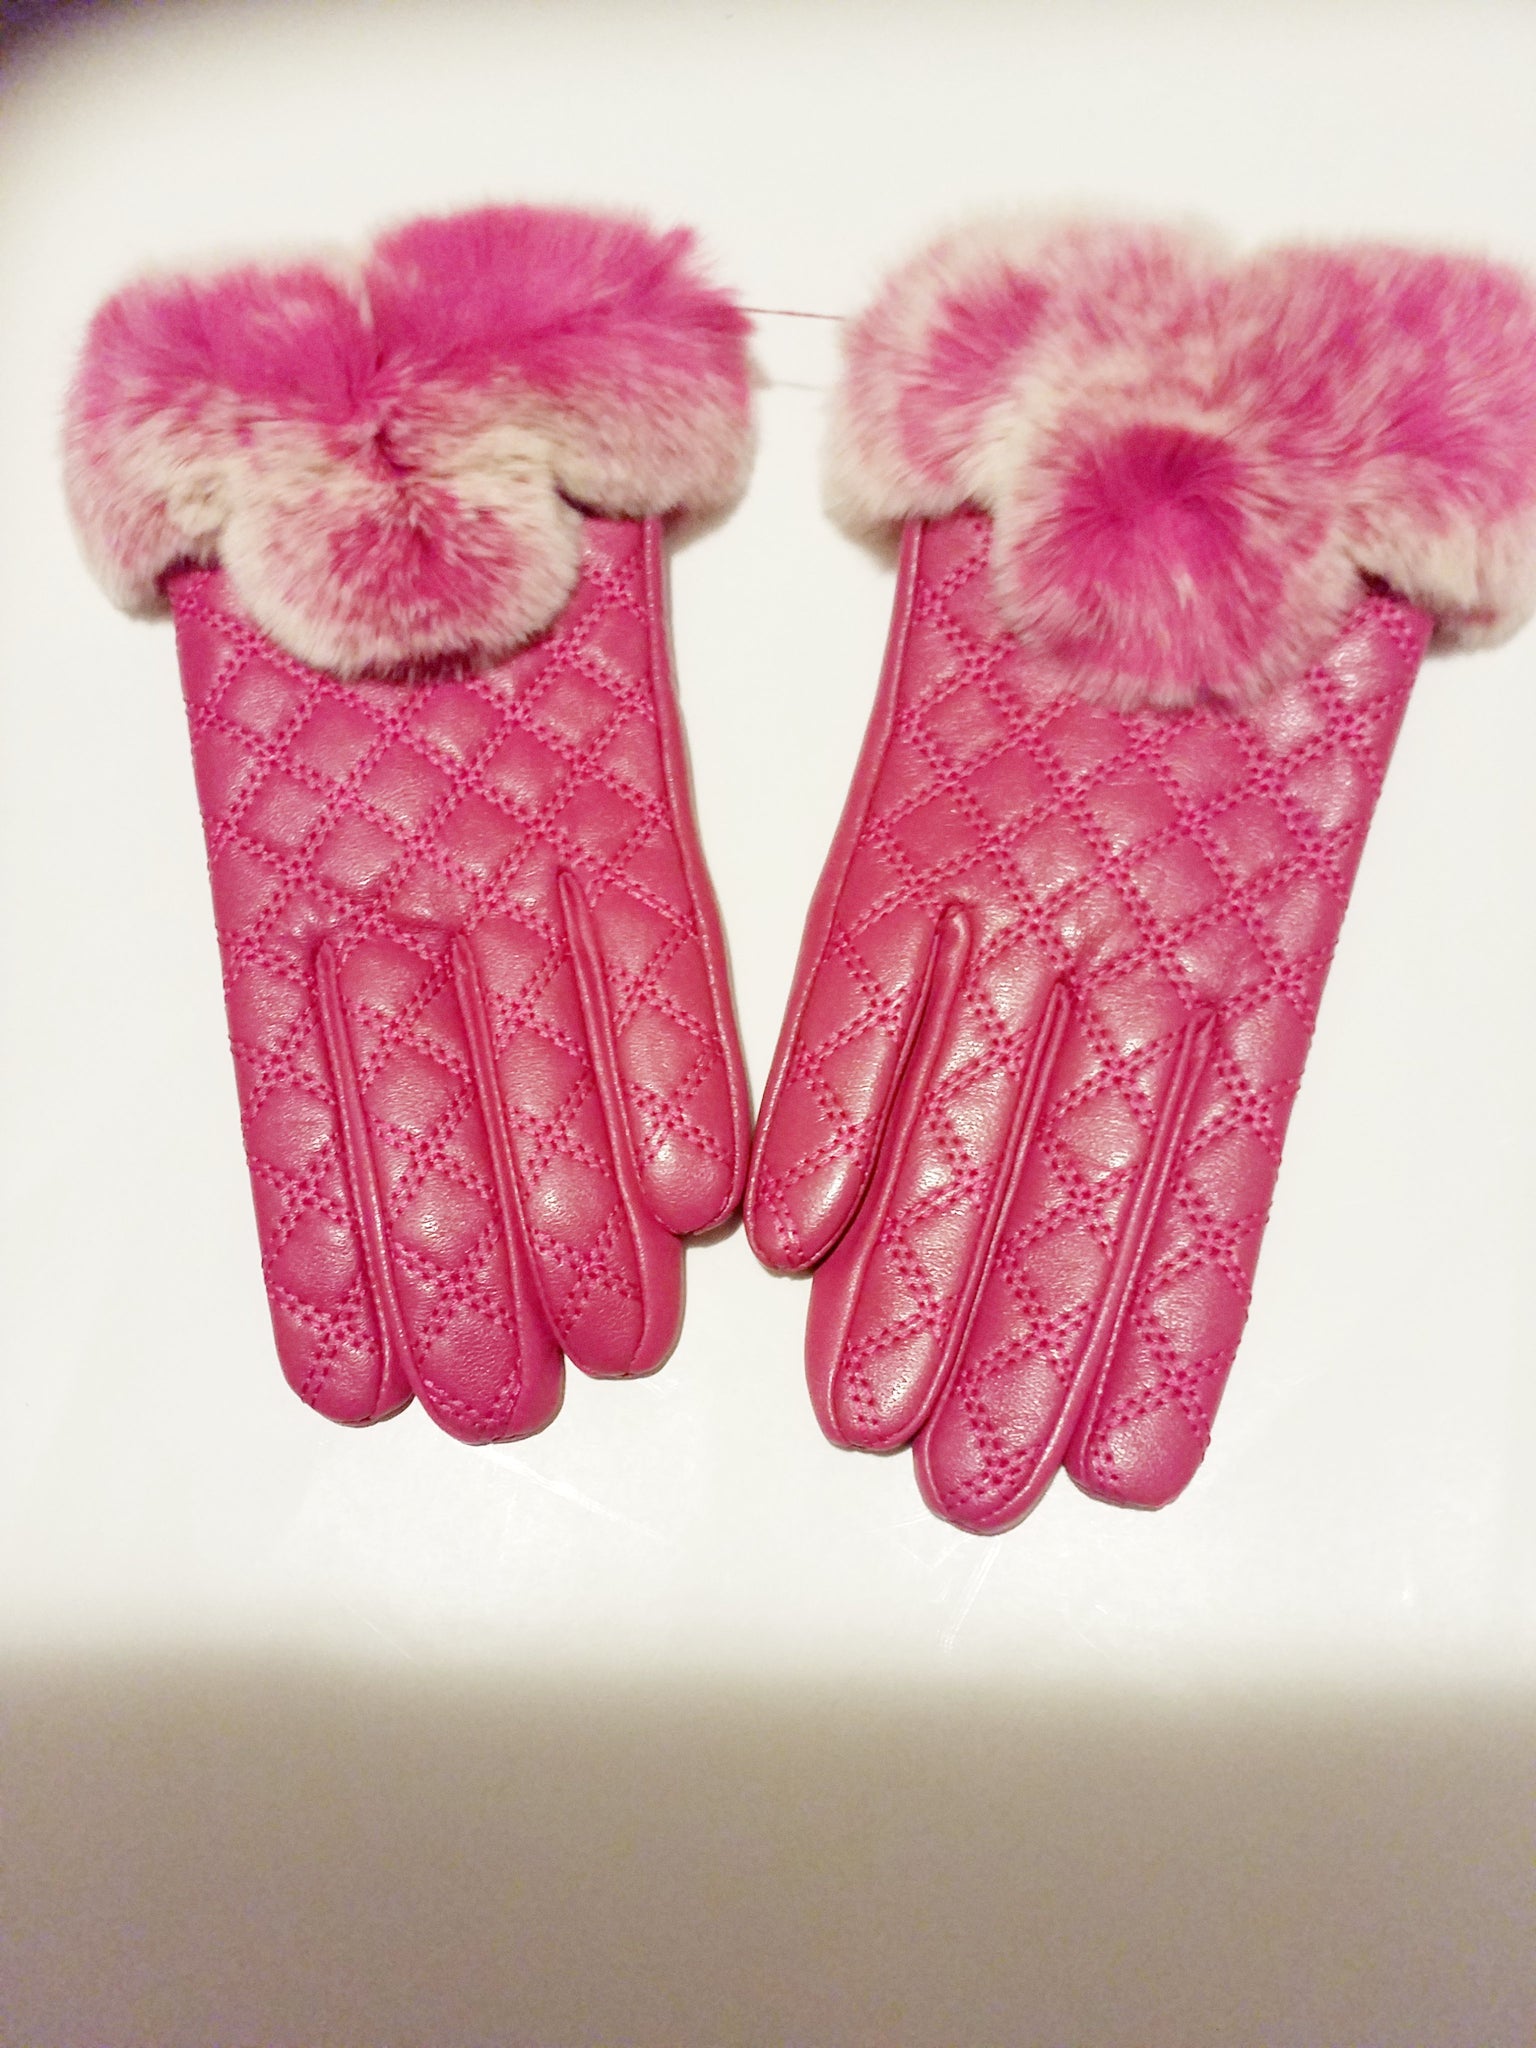 Women's gloves with Genuine leather and rabbit fur - ENUBEE